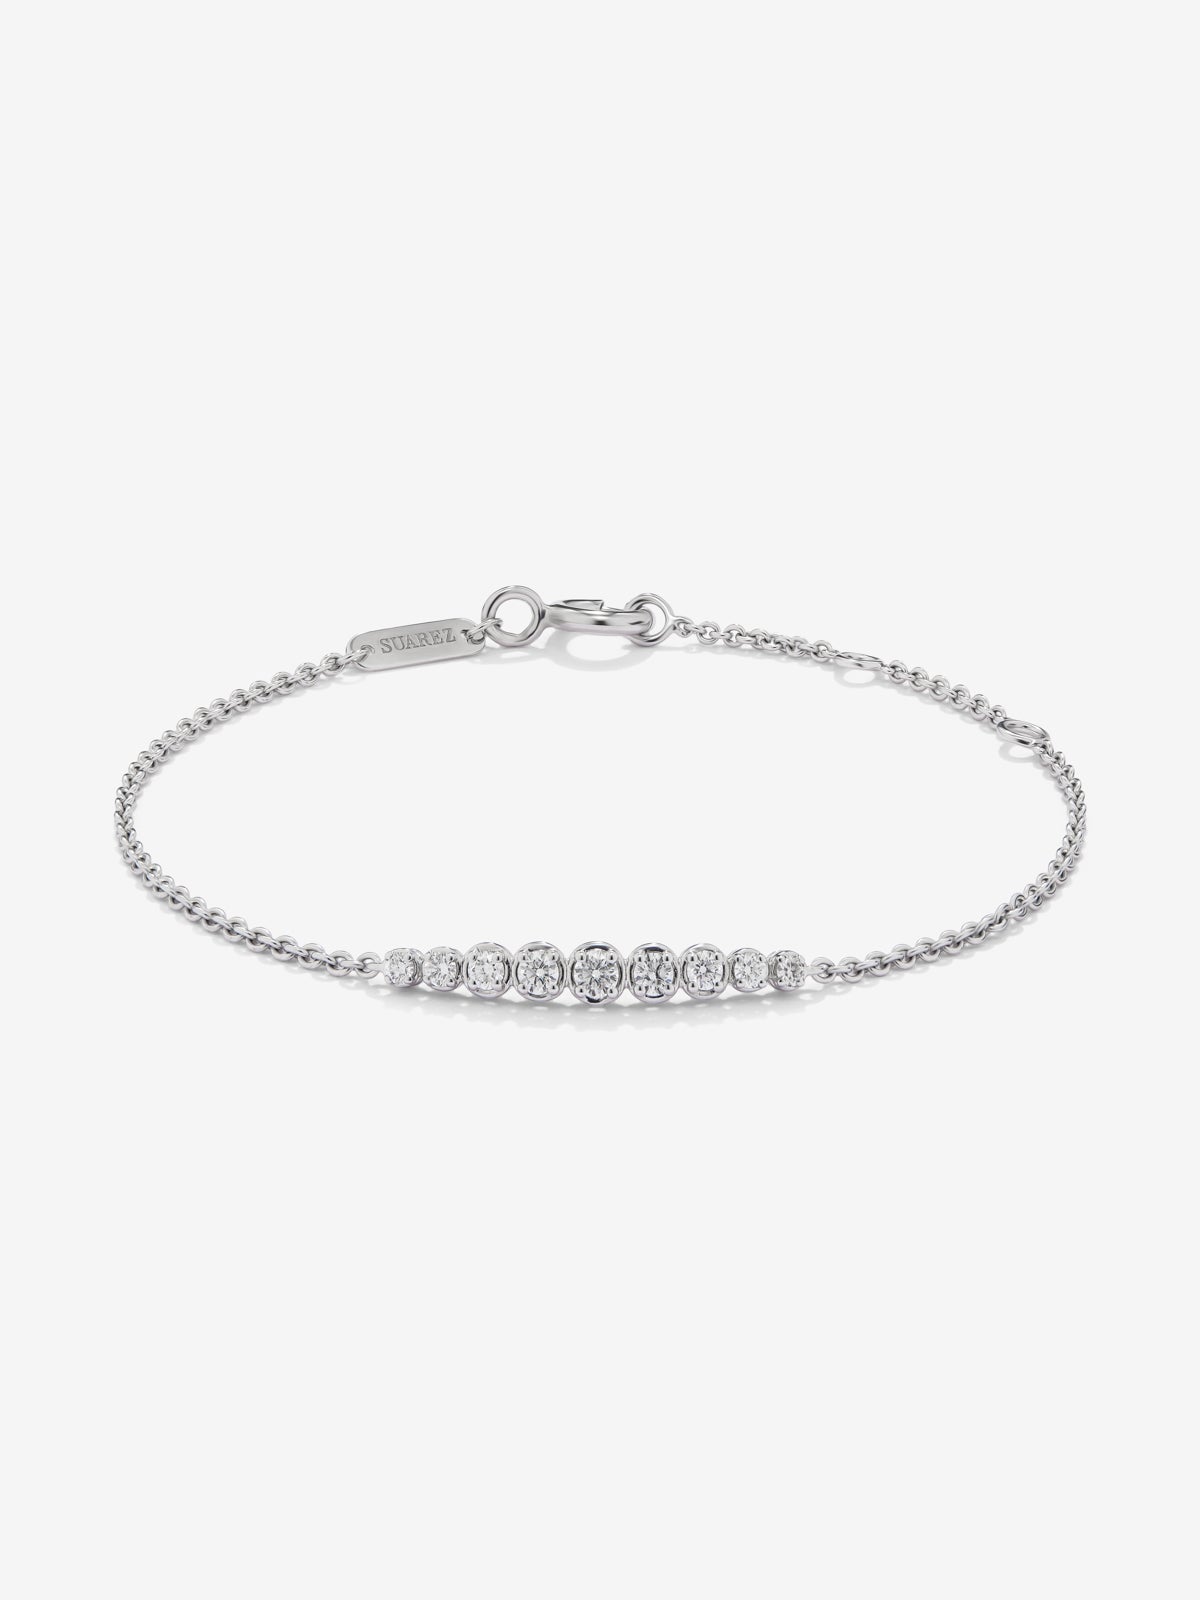 18K white gold bracelet with 9 brilliant-cut diamonds with a total of 0.29 cts